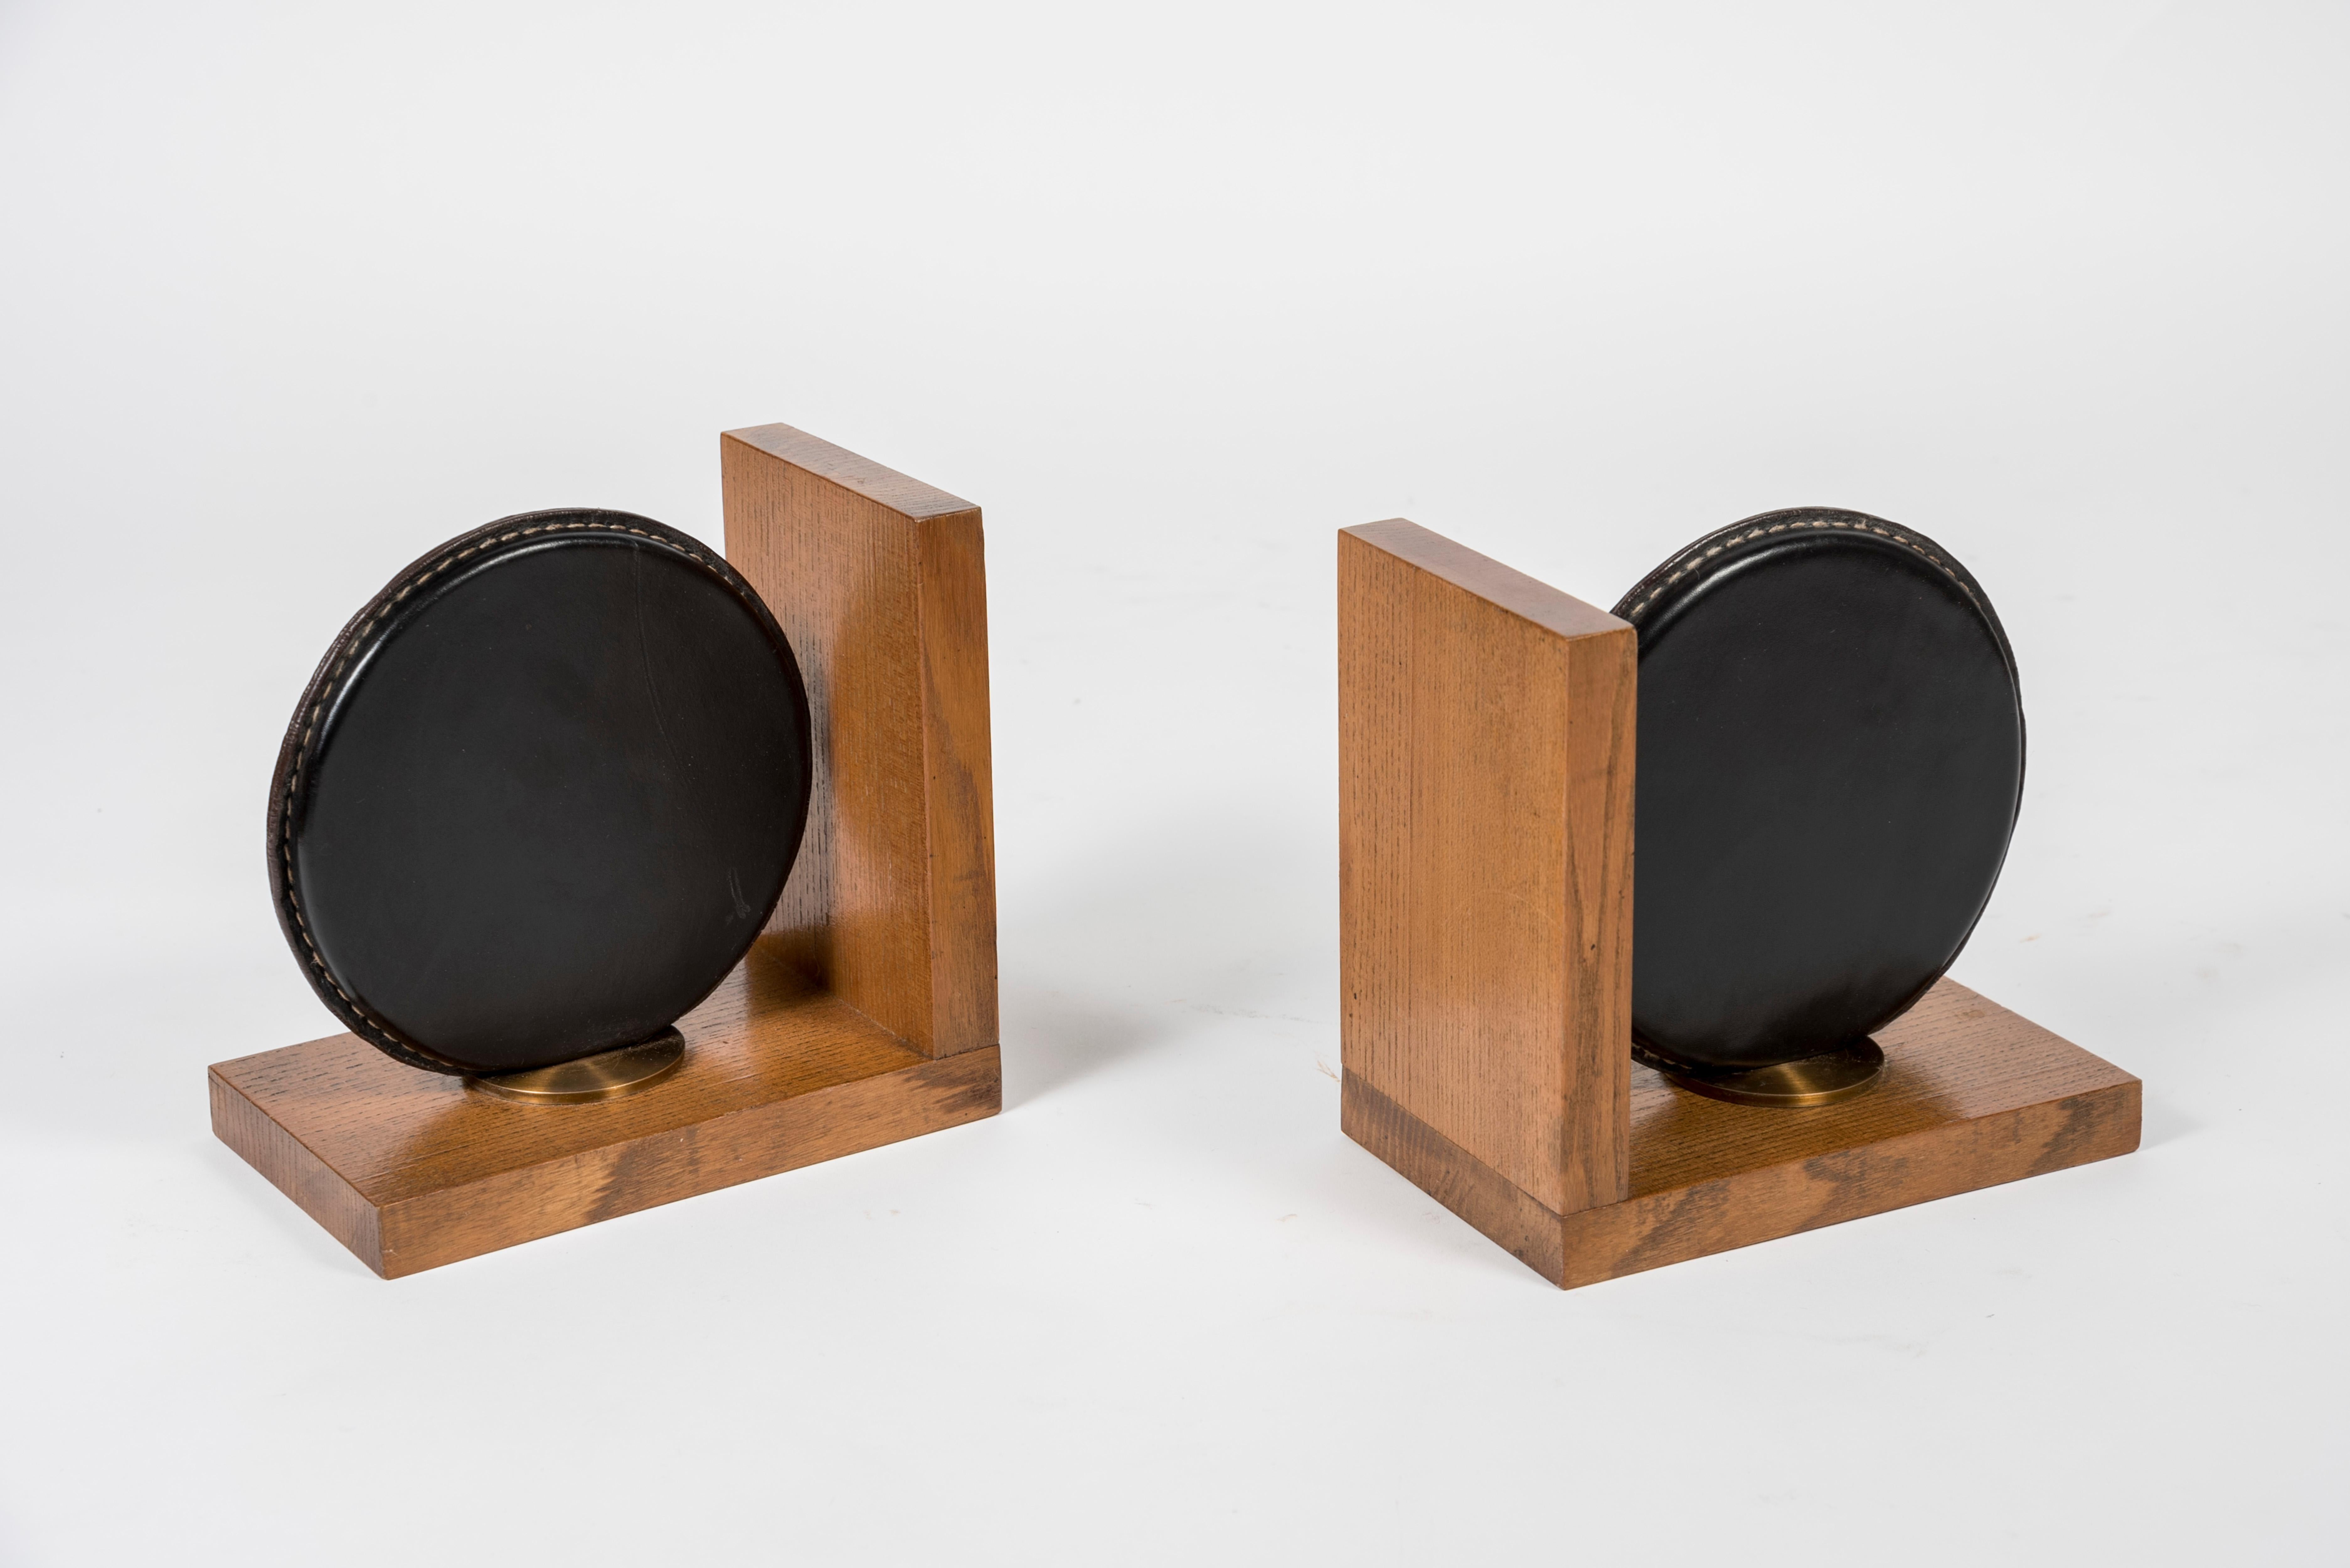 Stitched leather and oak bookends by Jacques Adnet.